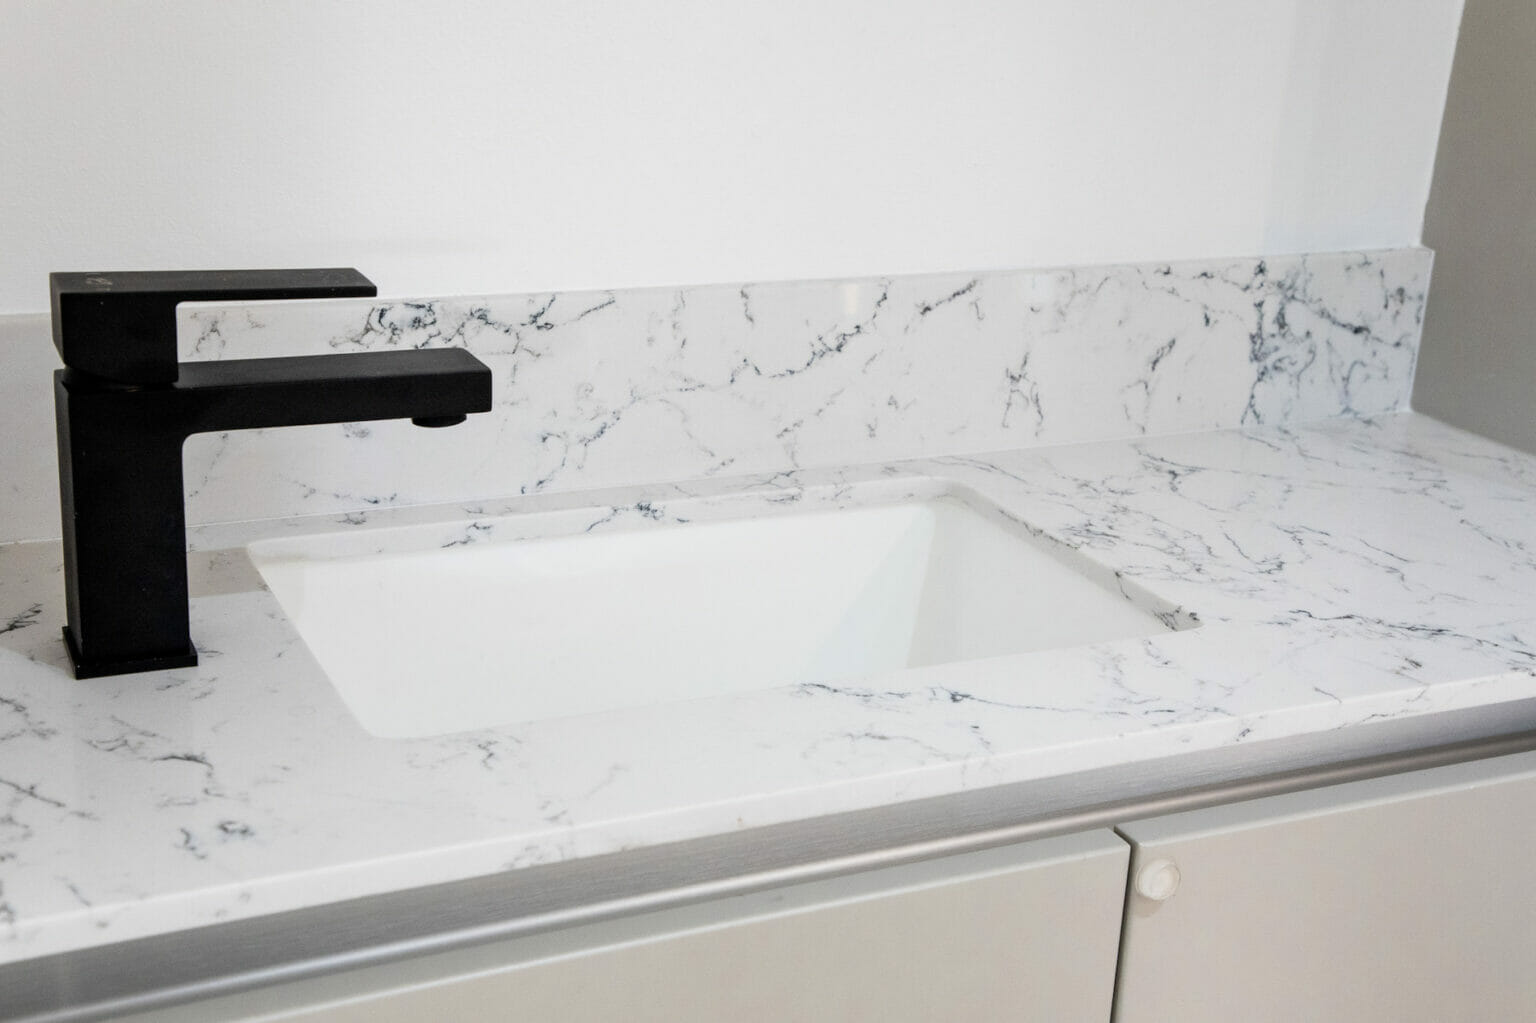 Infin8 Surfacing’s solid surfacing basin is integrated into the Caeserstone top